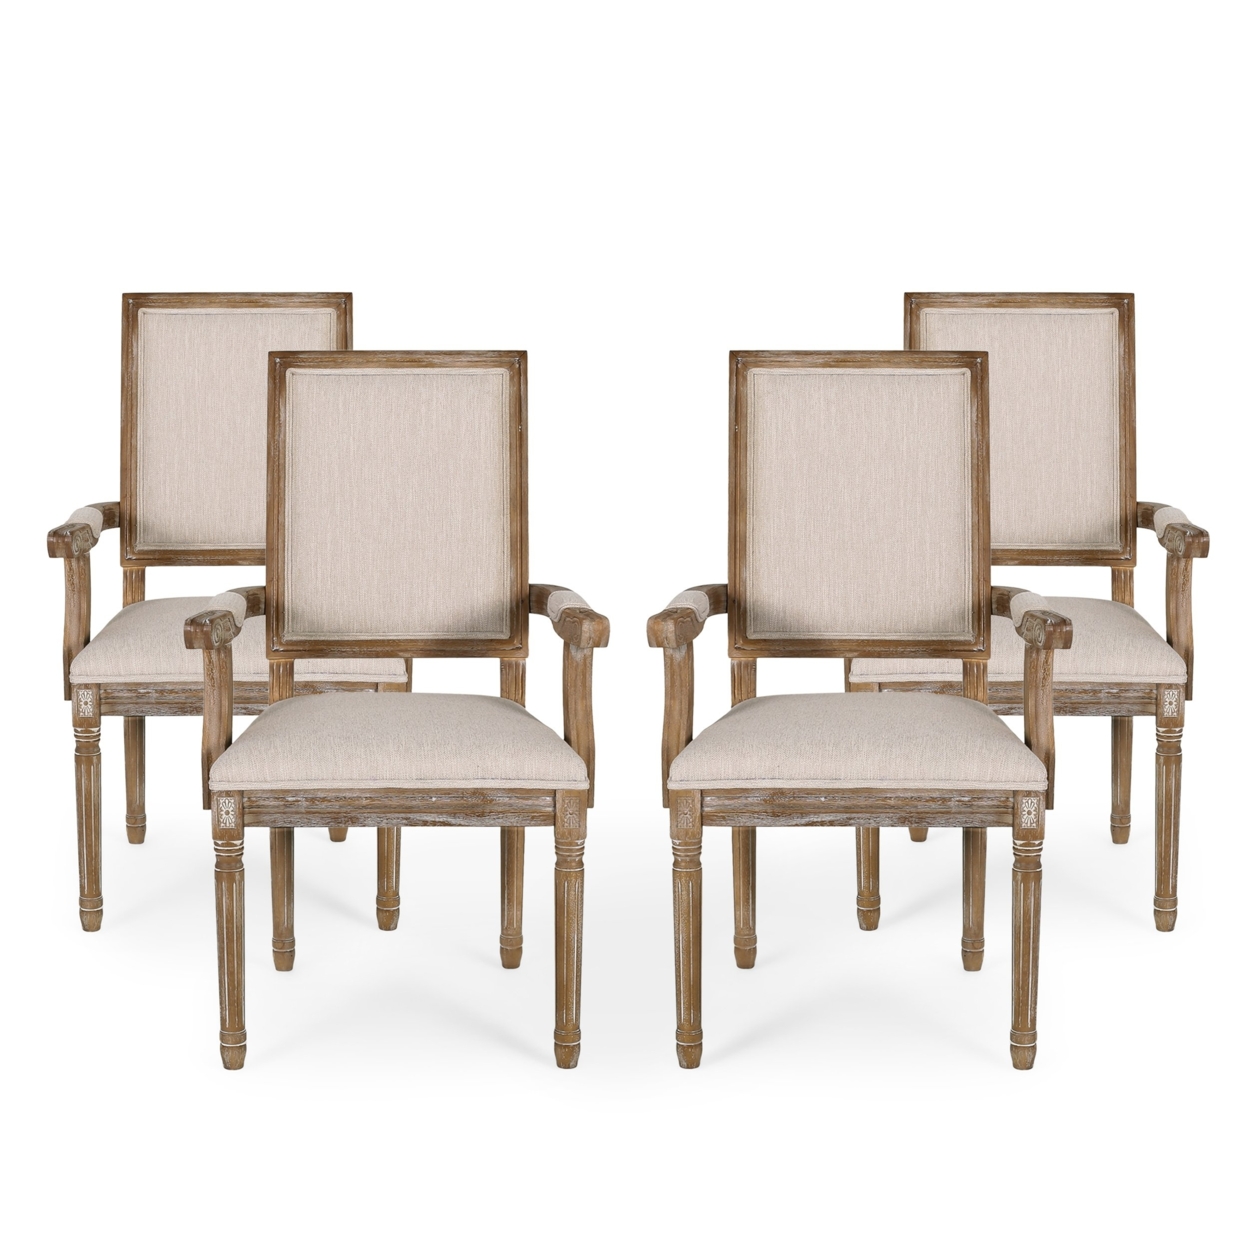 Zentner French Country Wood Upholstered Dining Chair - Natural/brown, Set Of 6